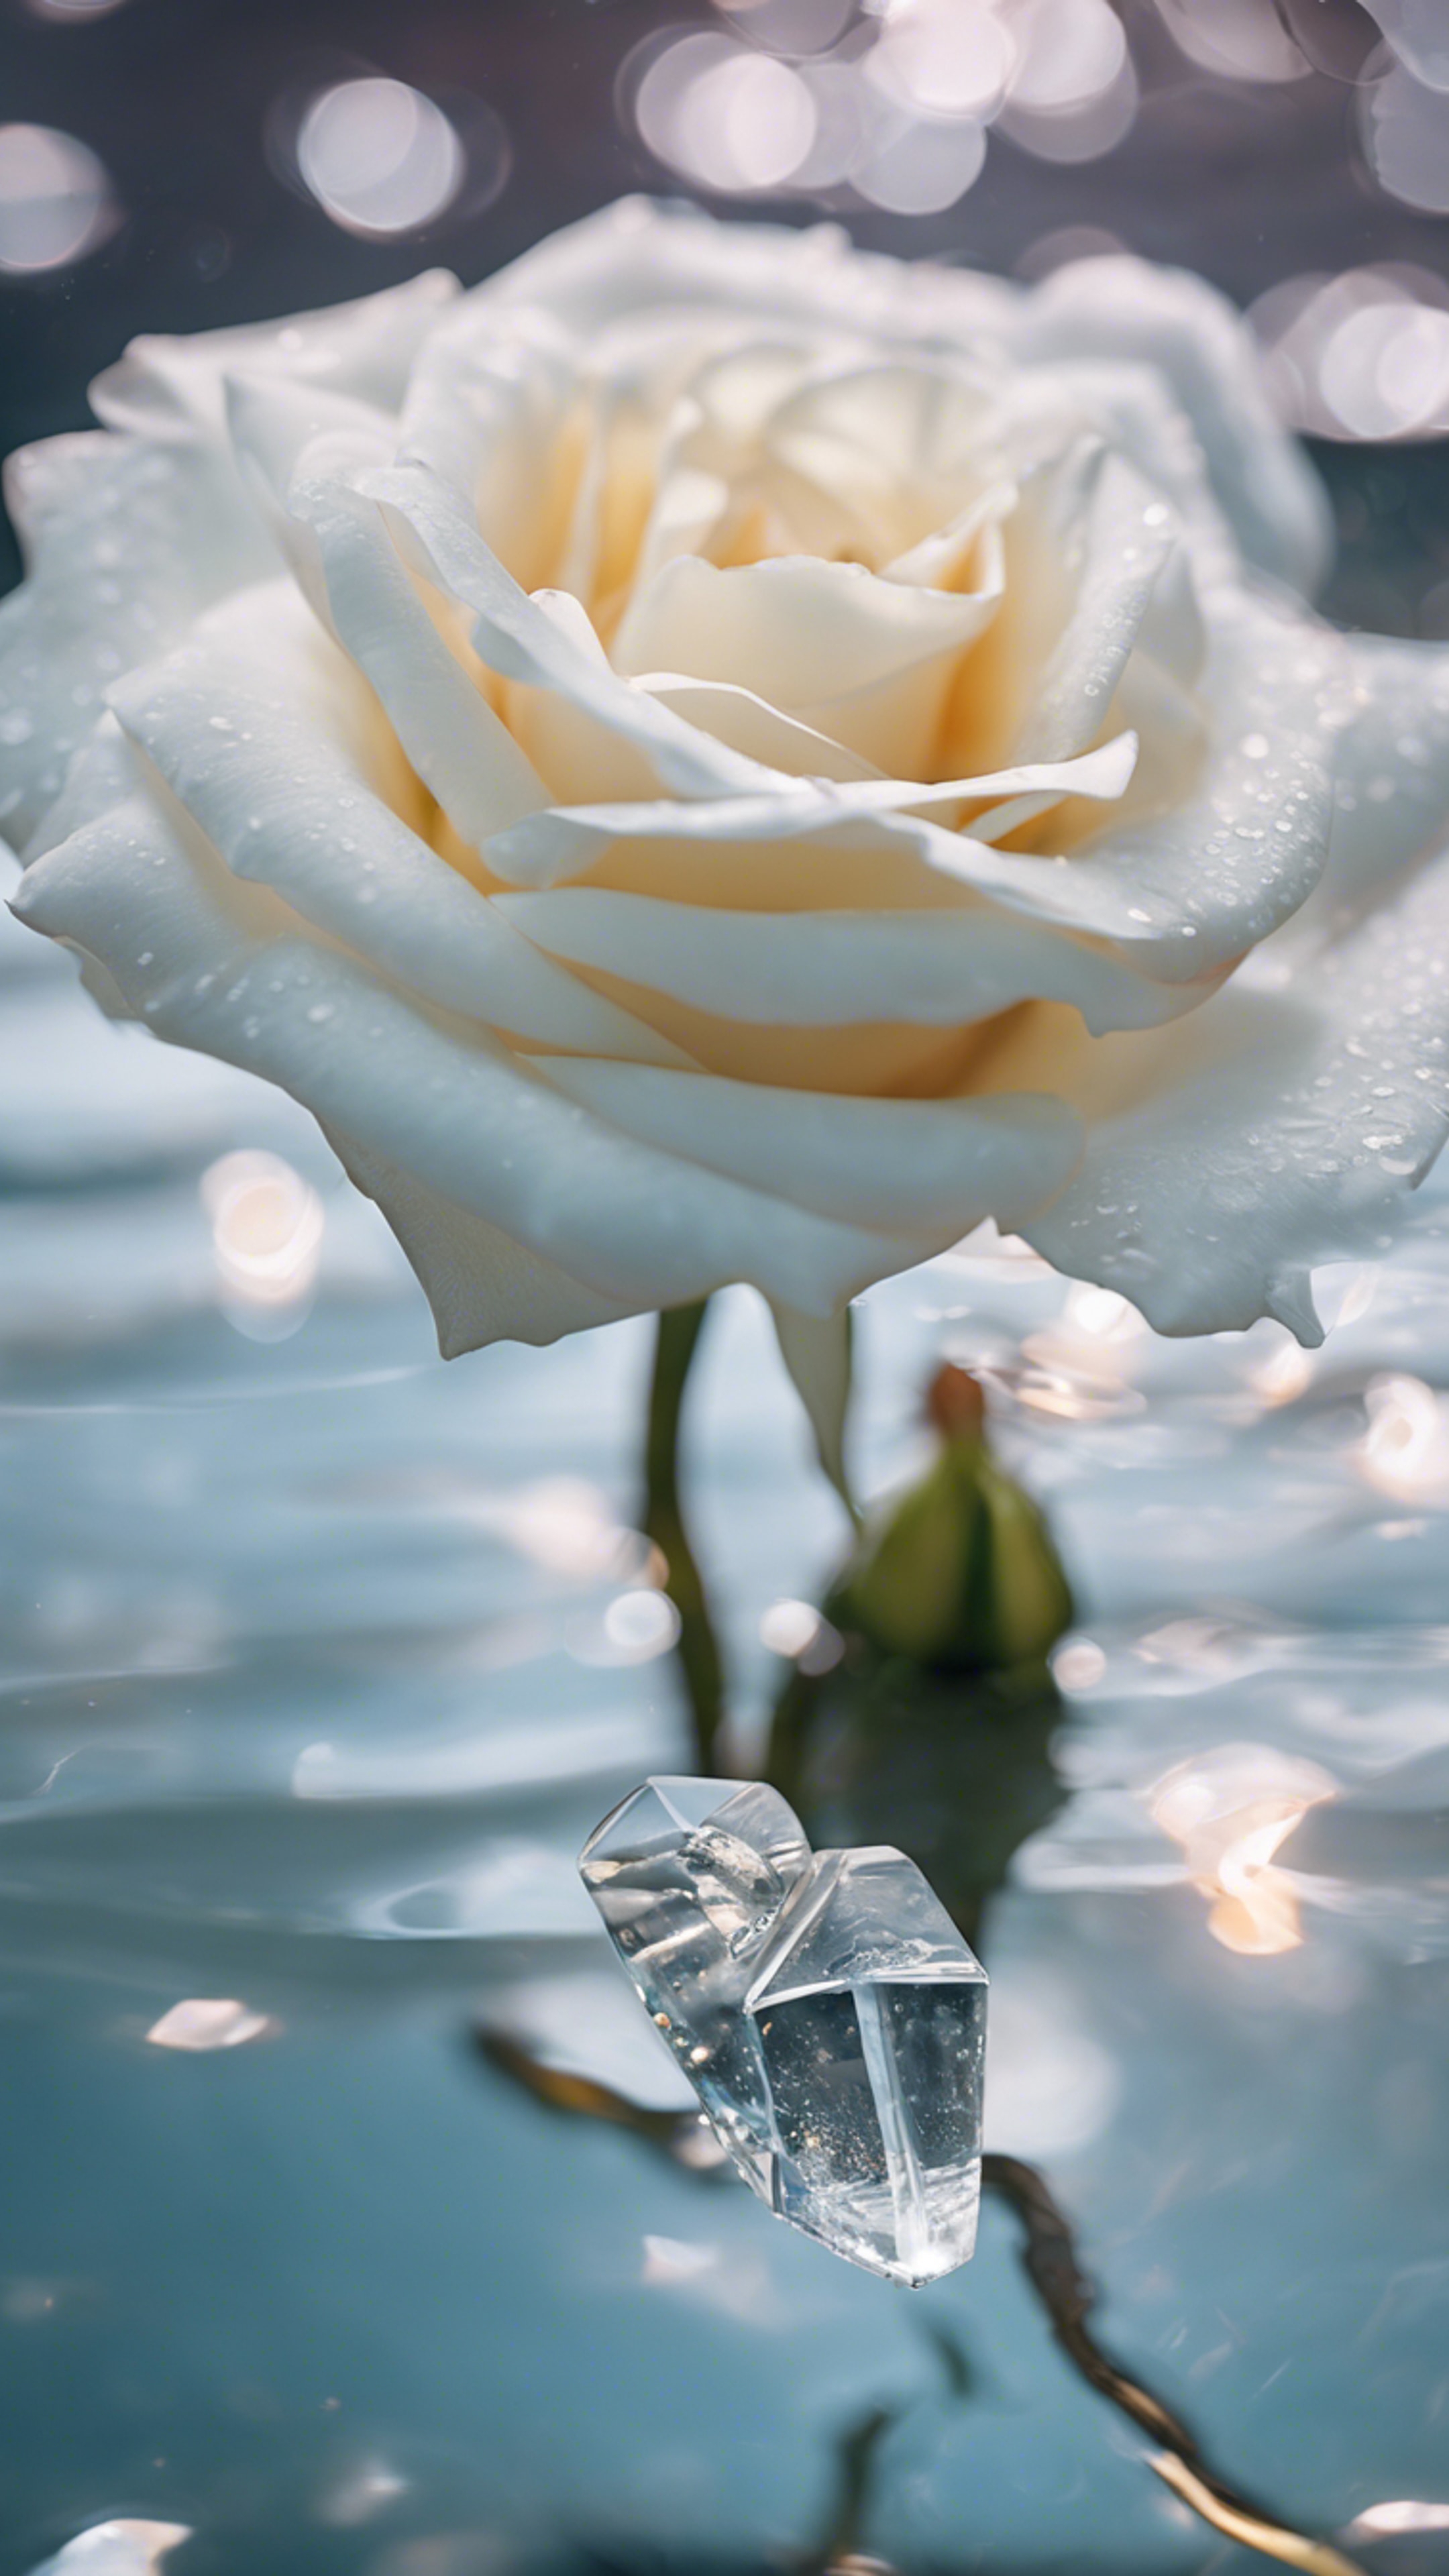 A white rose submerged in clear crystal water, petals gracefully spreading. Тапет[af81d3e8e21443b29805]